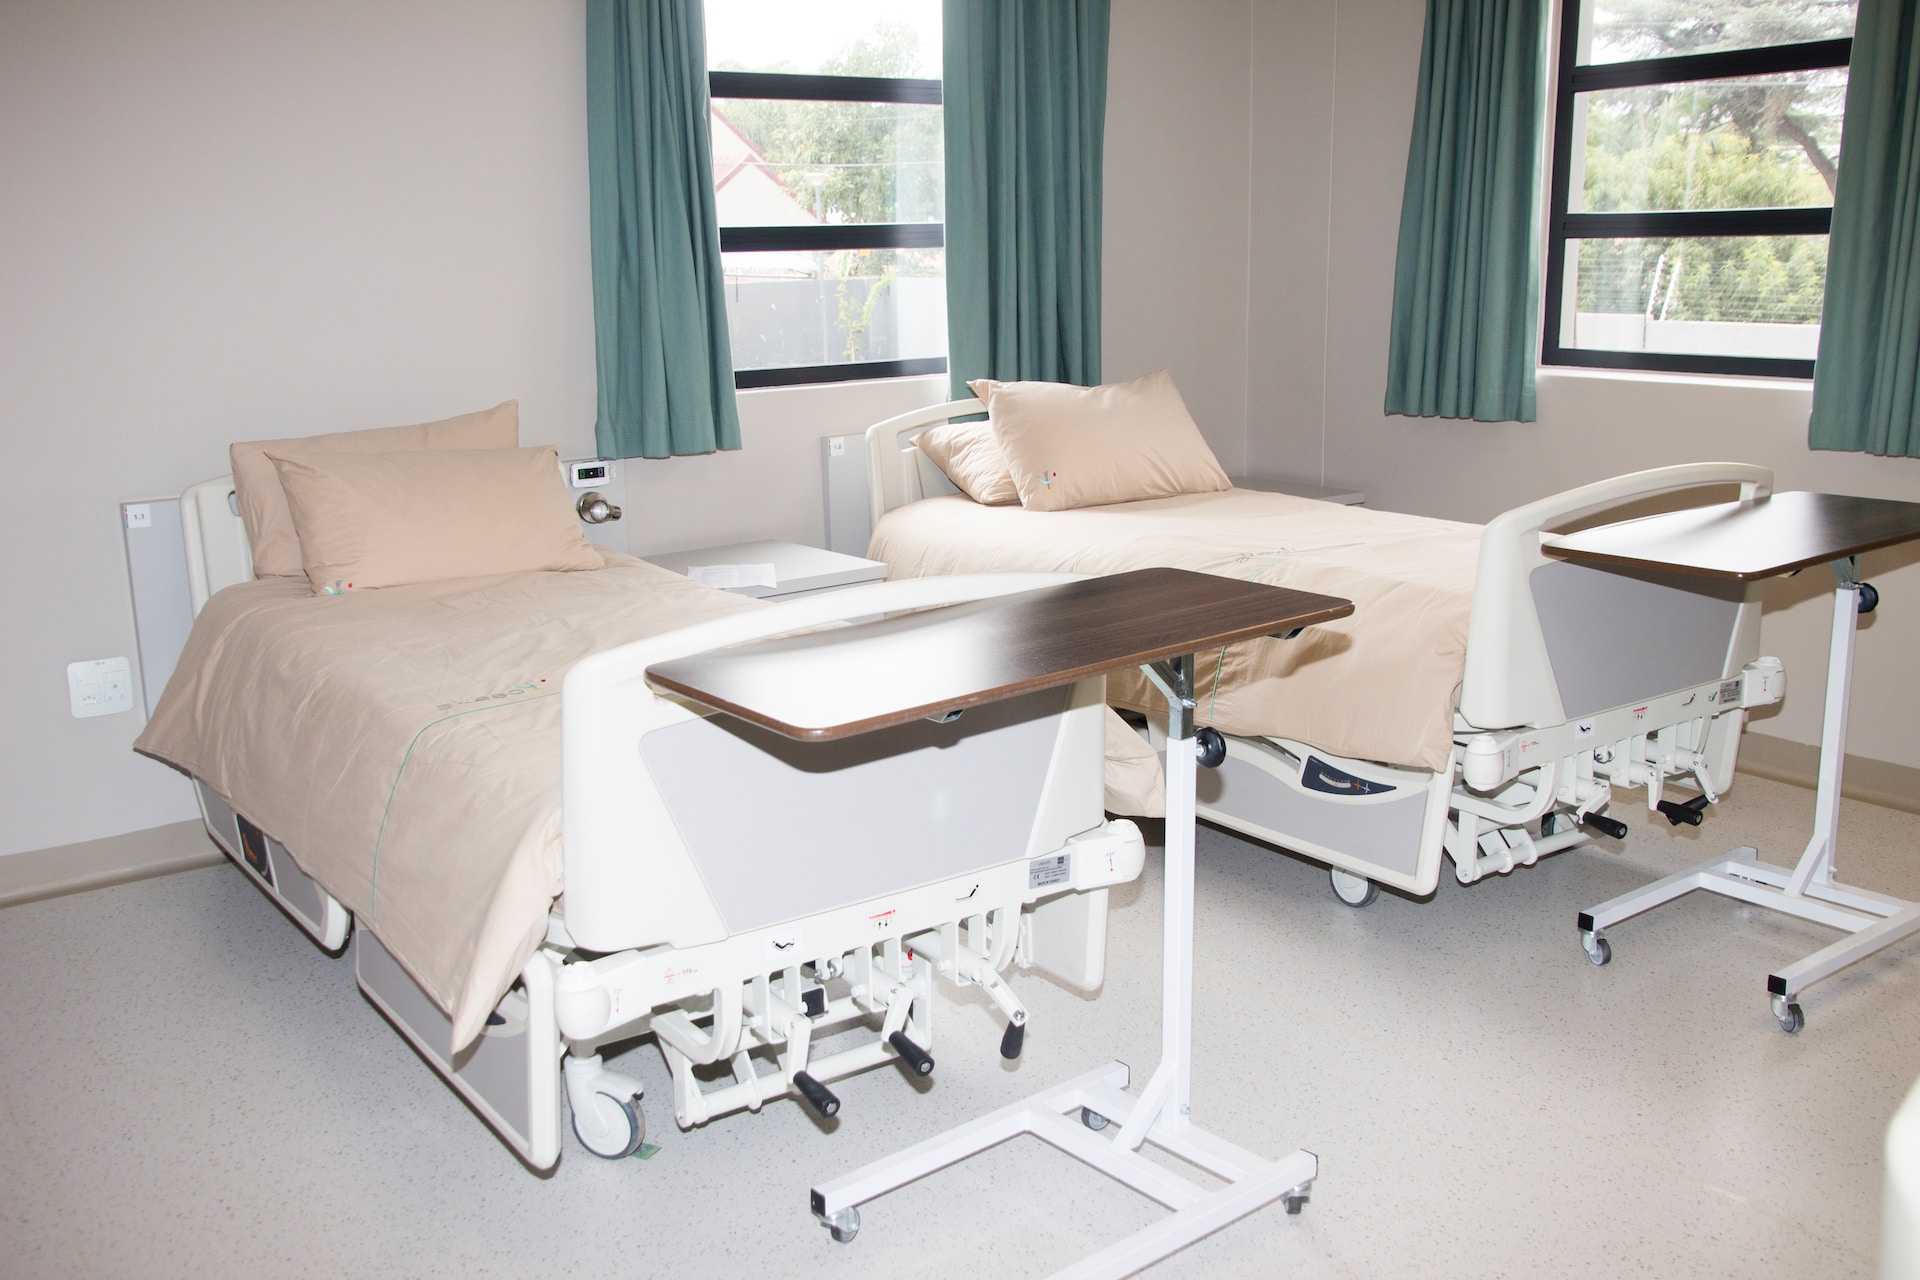 Hospital Bedsores: Are You a Victim of Medical Malpractice?